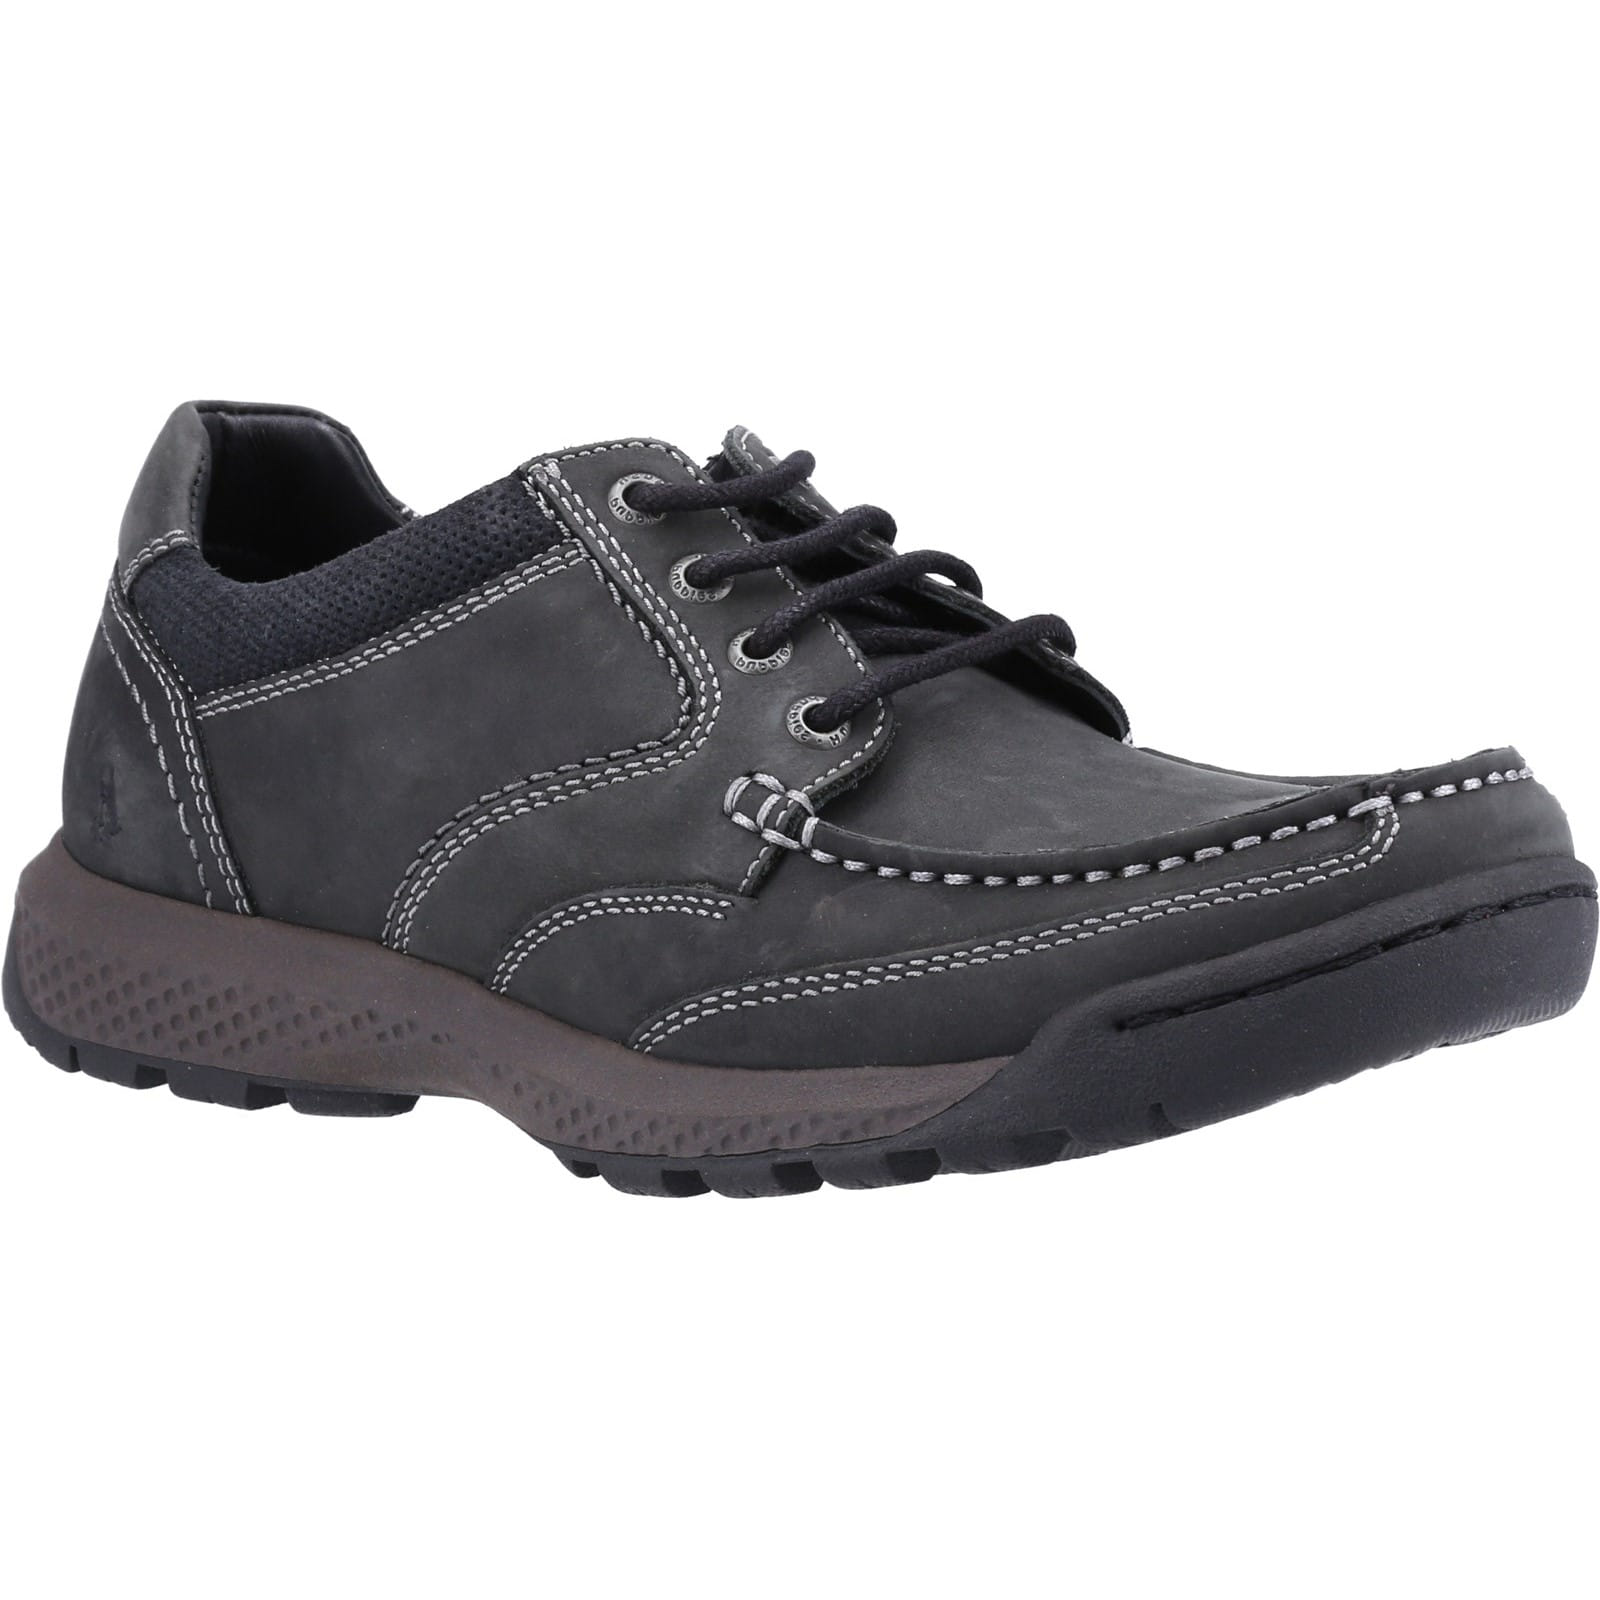 Hush Puppies Men's Dominic Lace Up Leather Shoes - UK 8